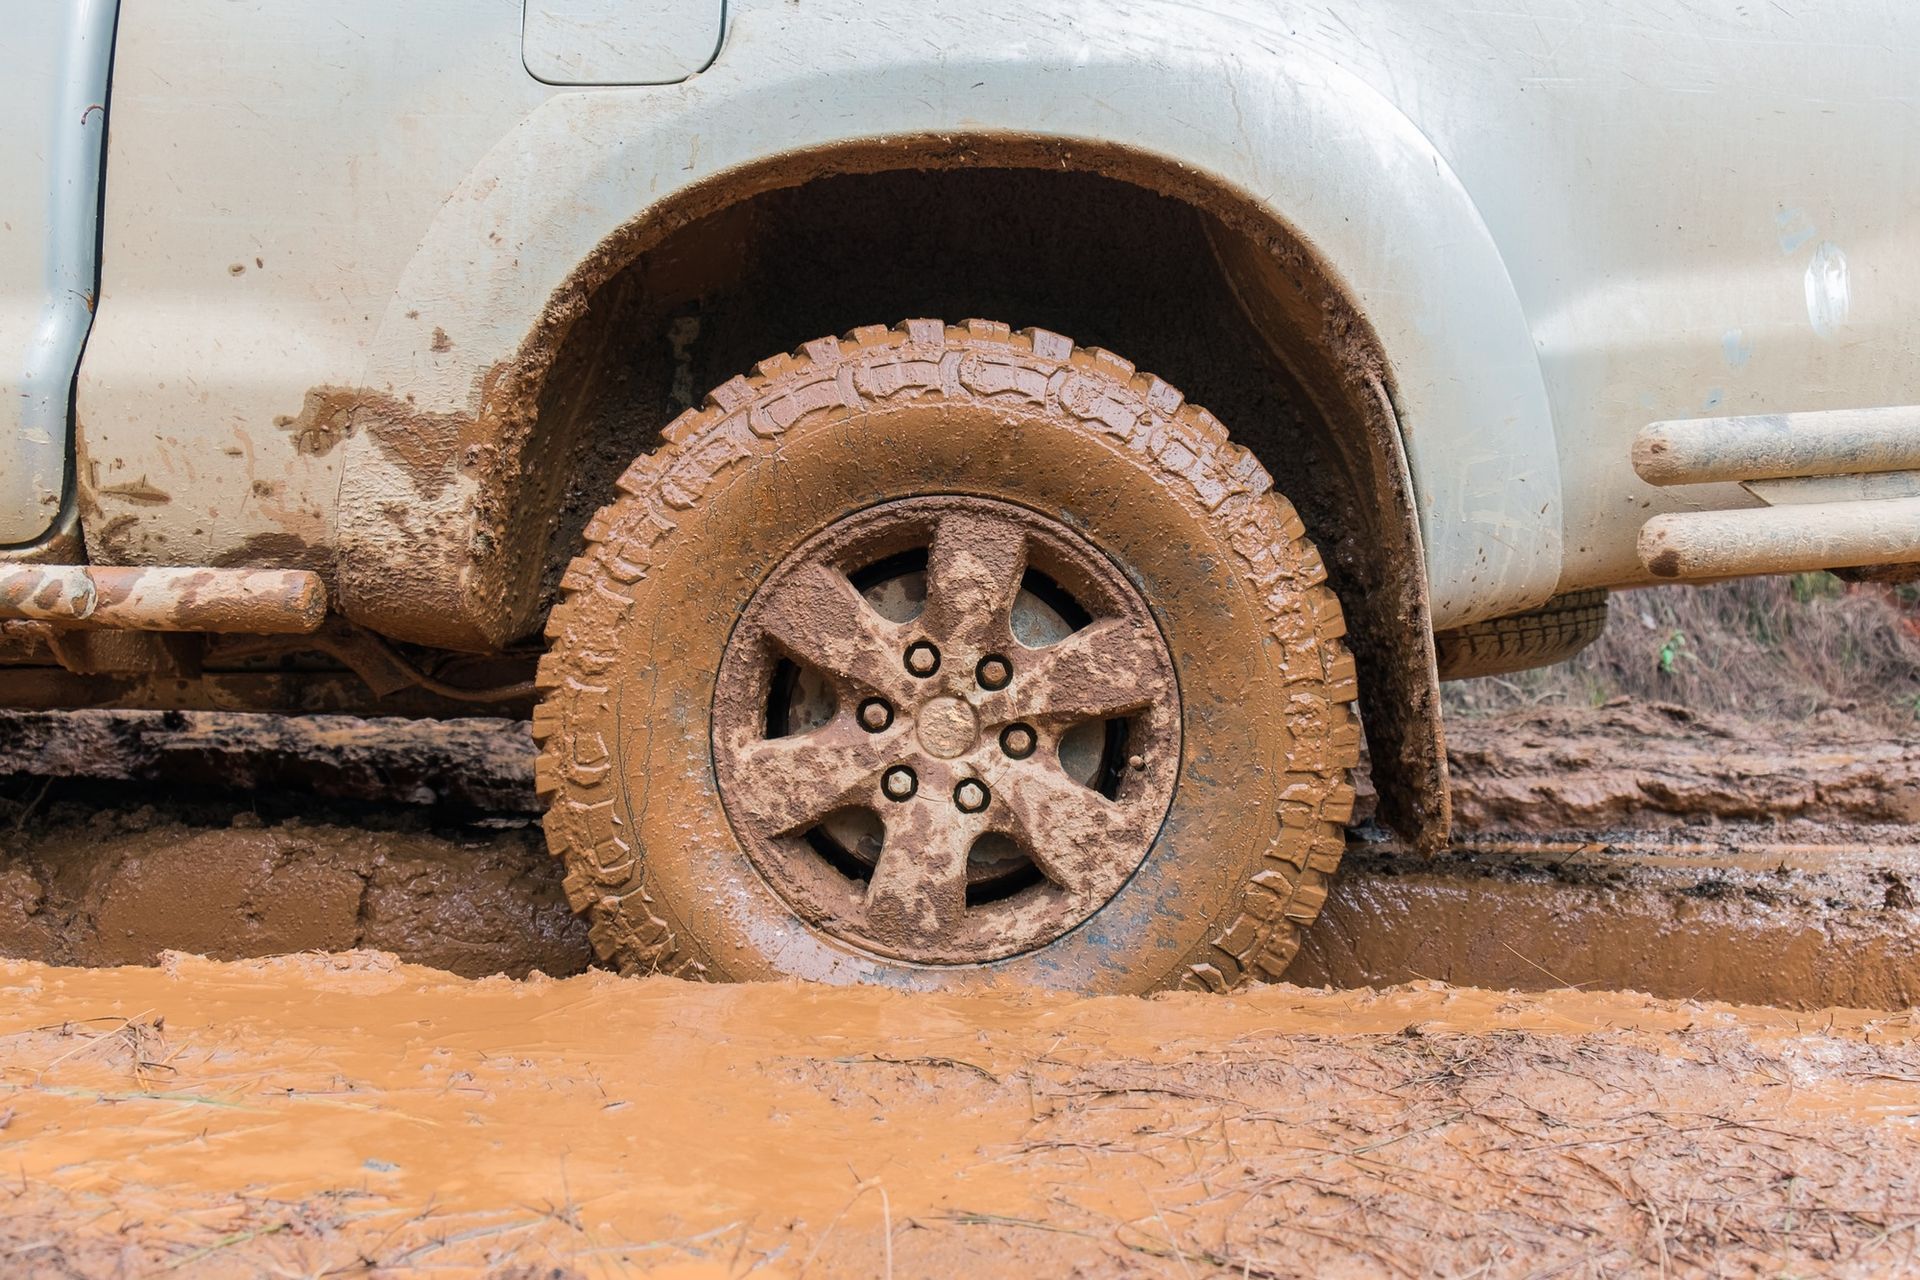 A muddy truck is driving through a muddy puddle.